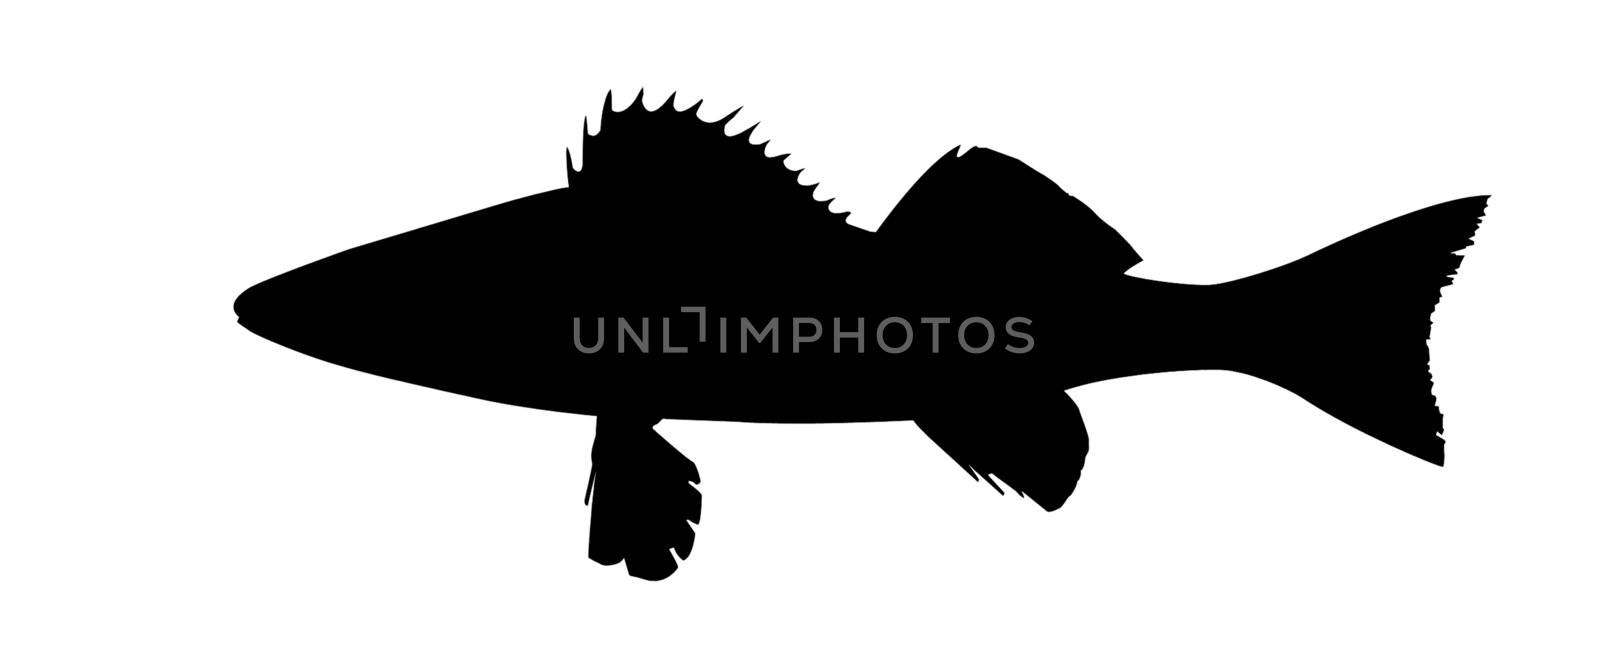 vector silhouette of fish on white background by basel101658